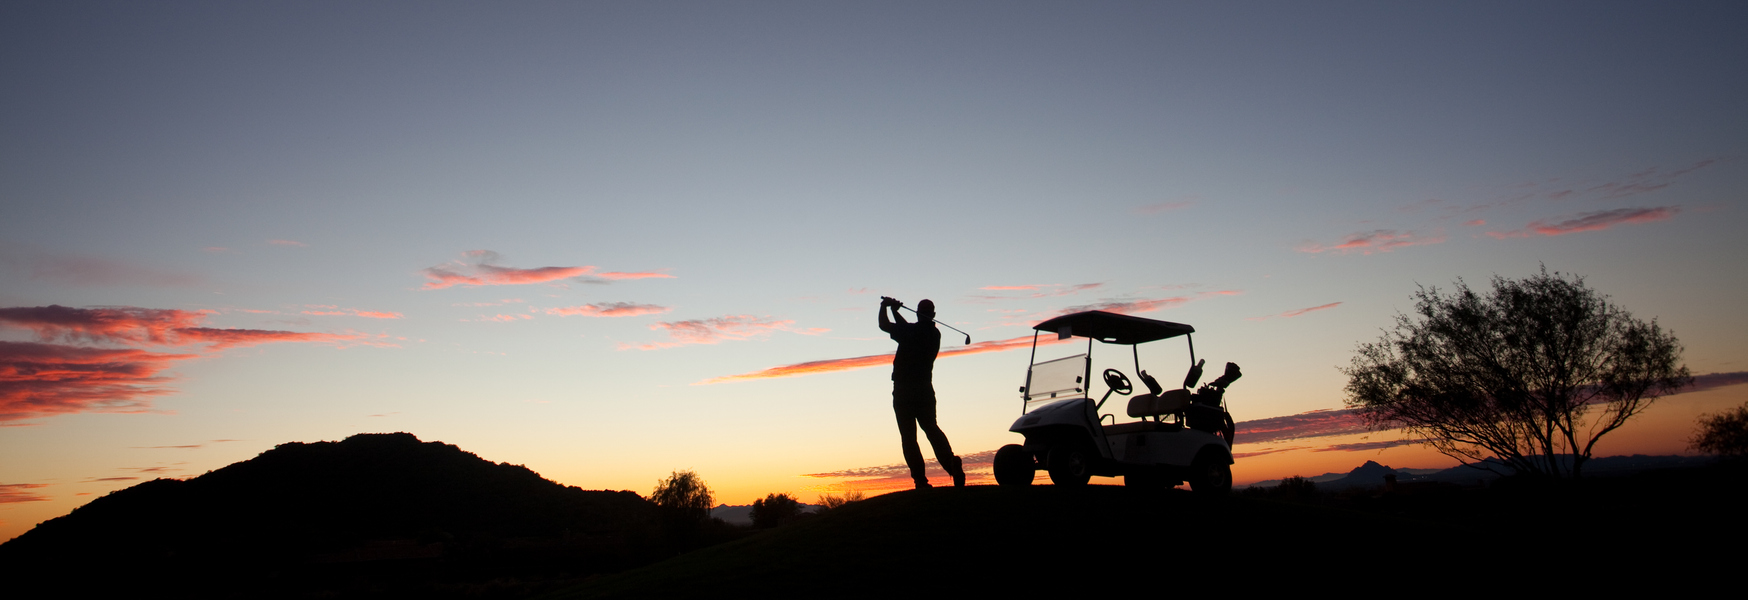 silhouette of a golfer against a sunset